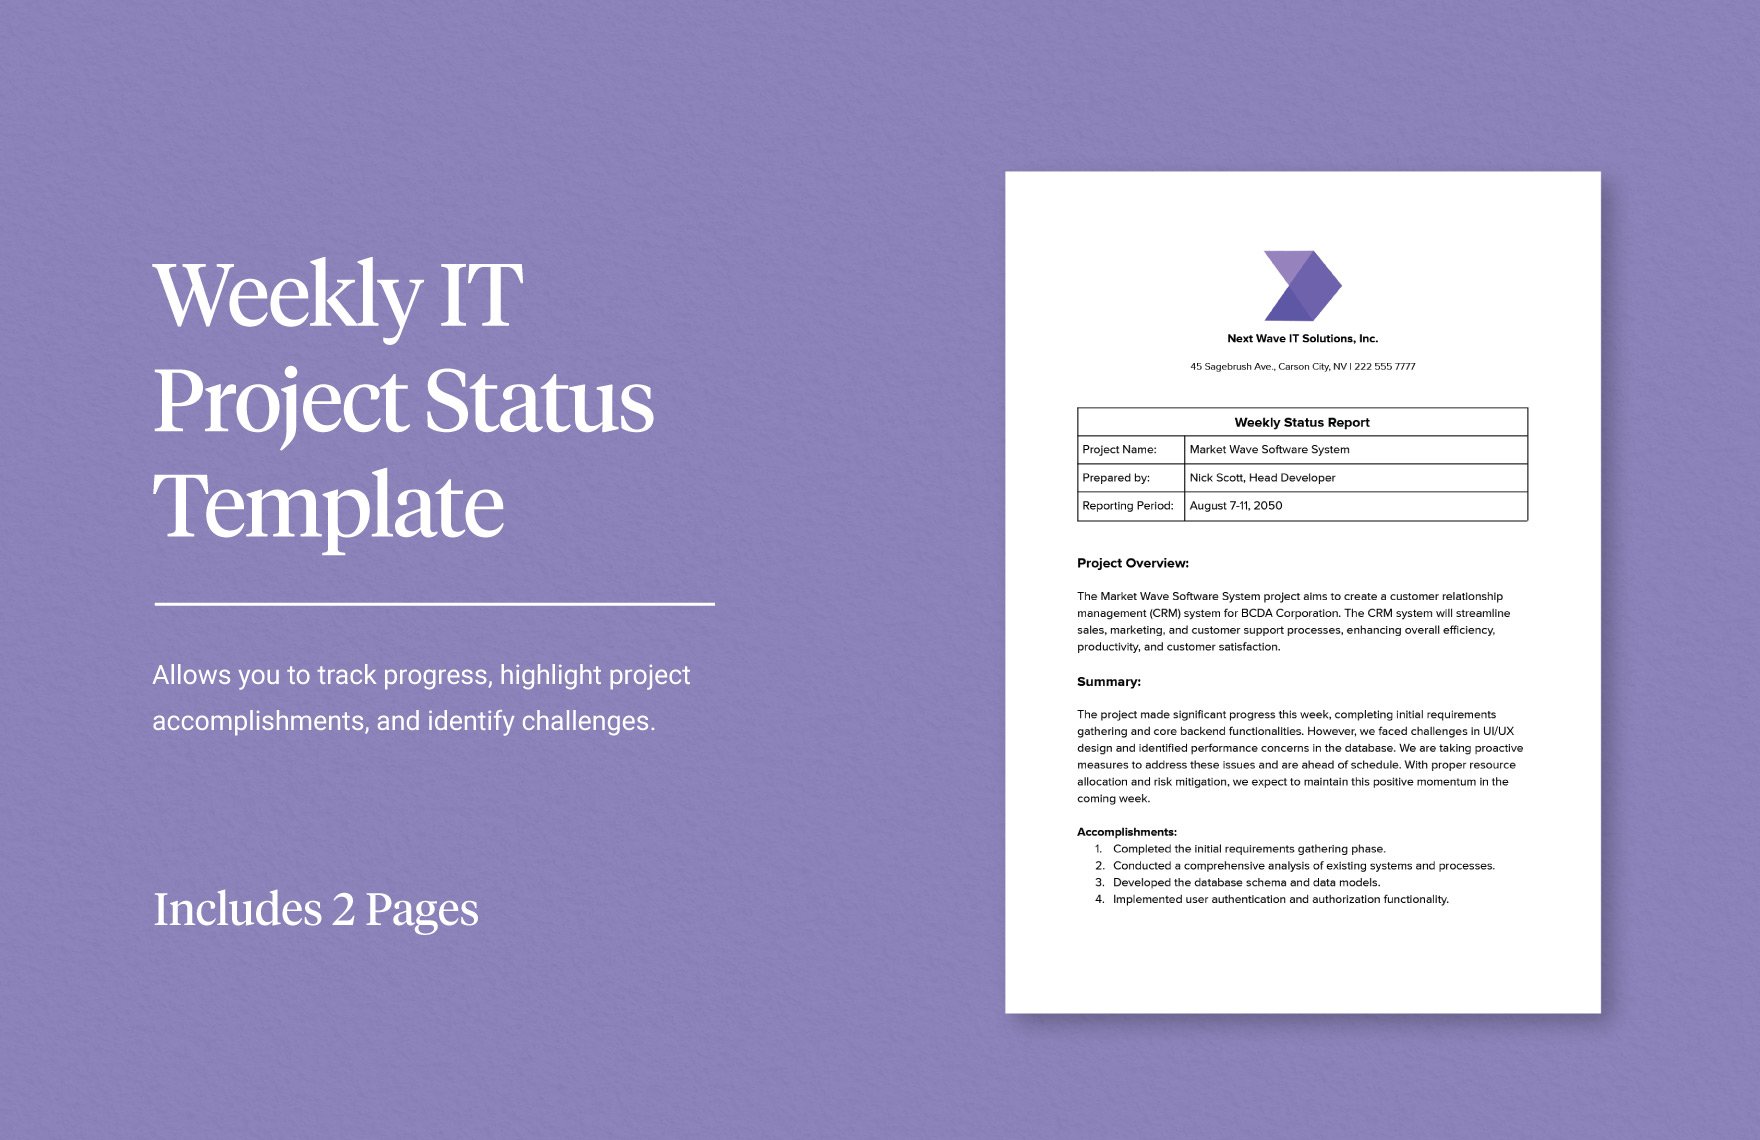 Weekly IT Project Status Template